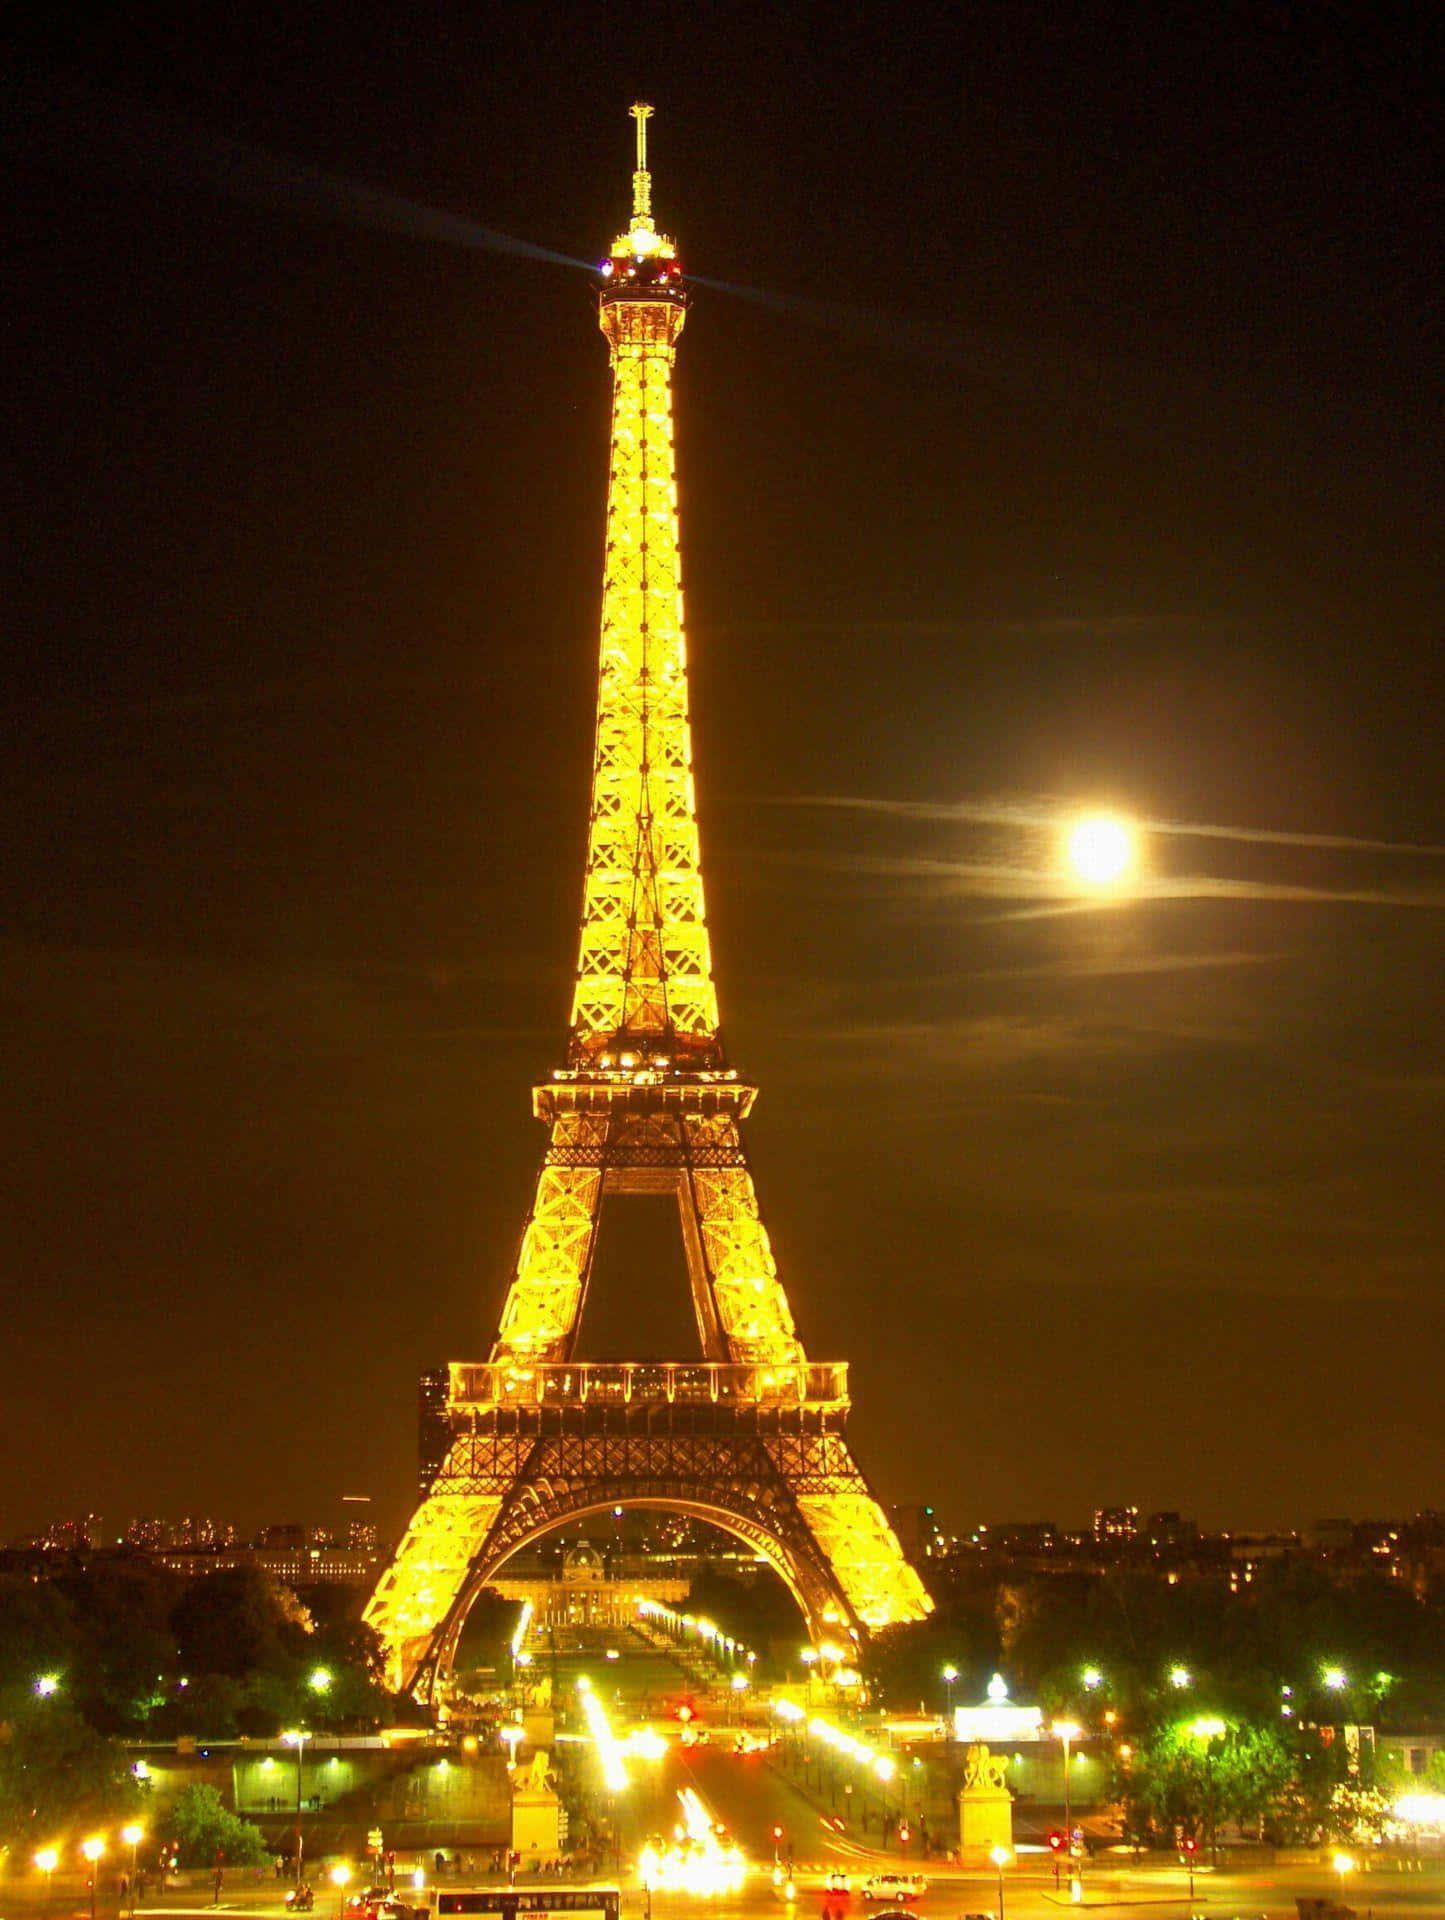 Marvel at the magical lights of the Eiffel Tower at night.